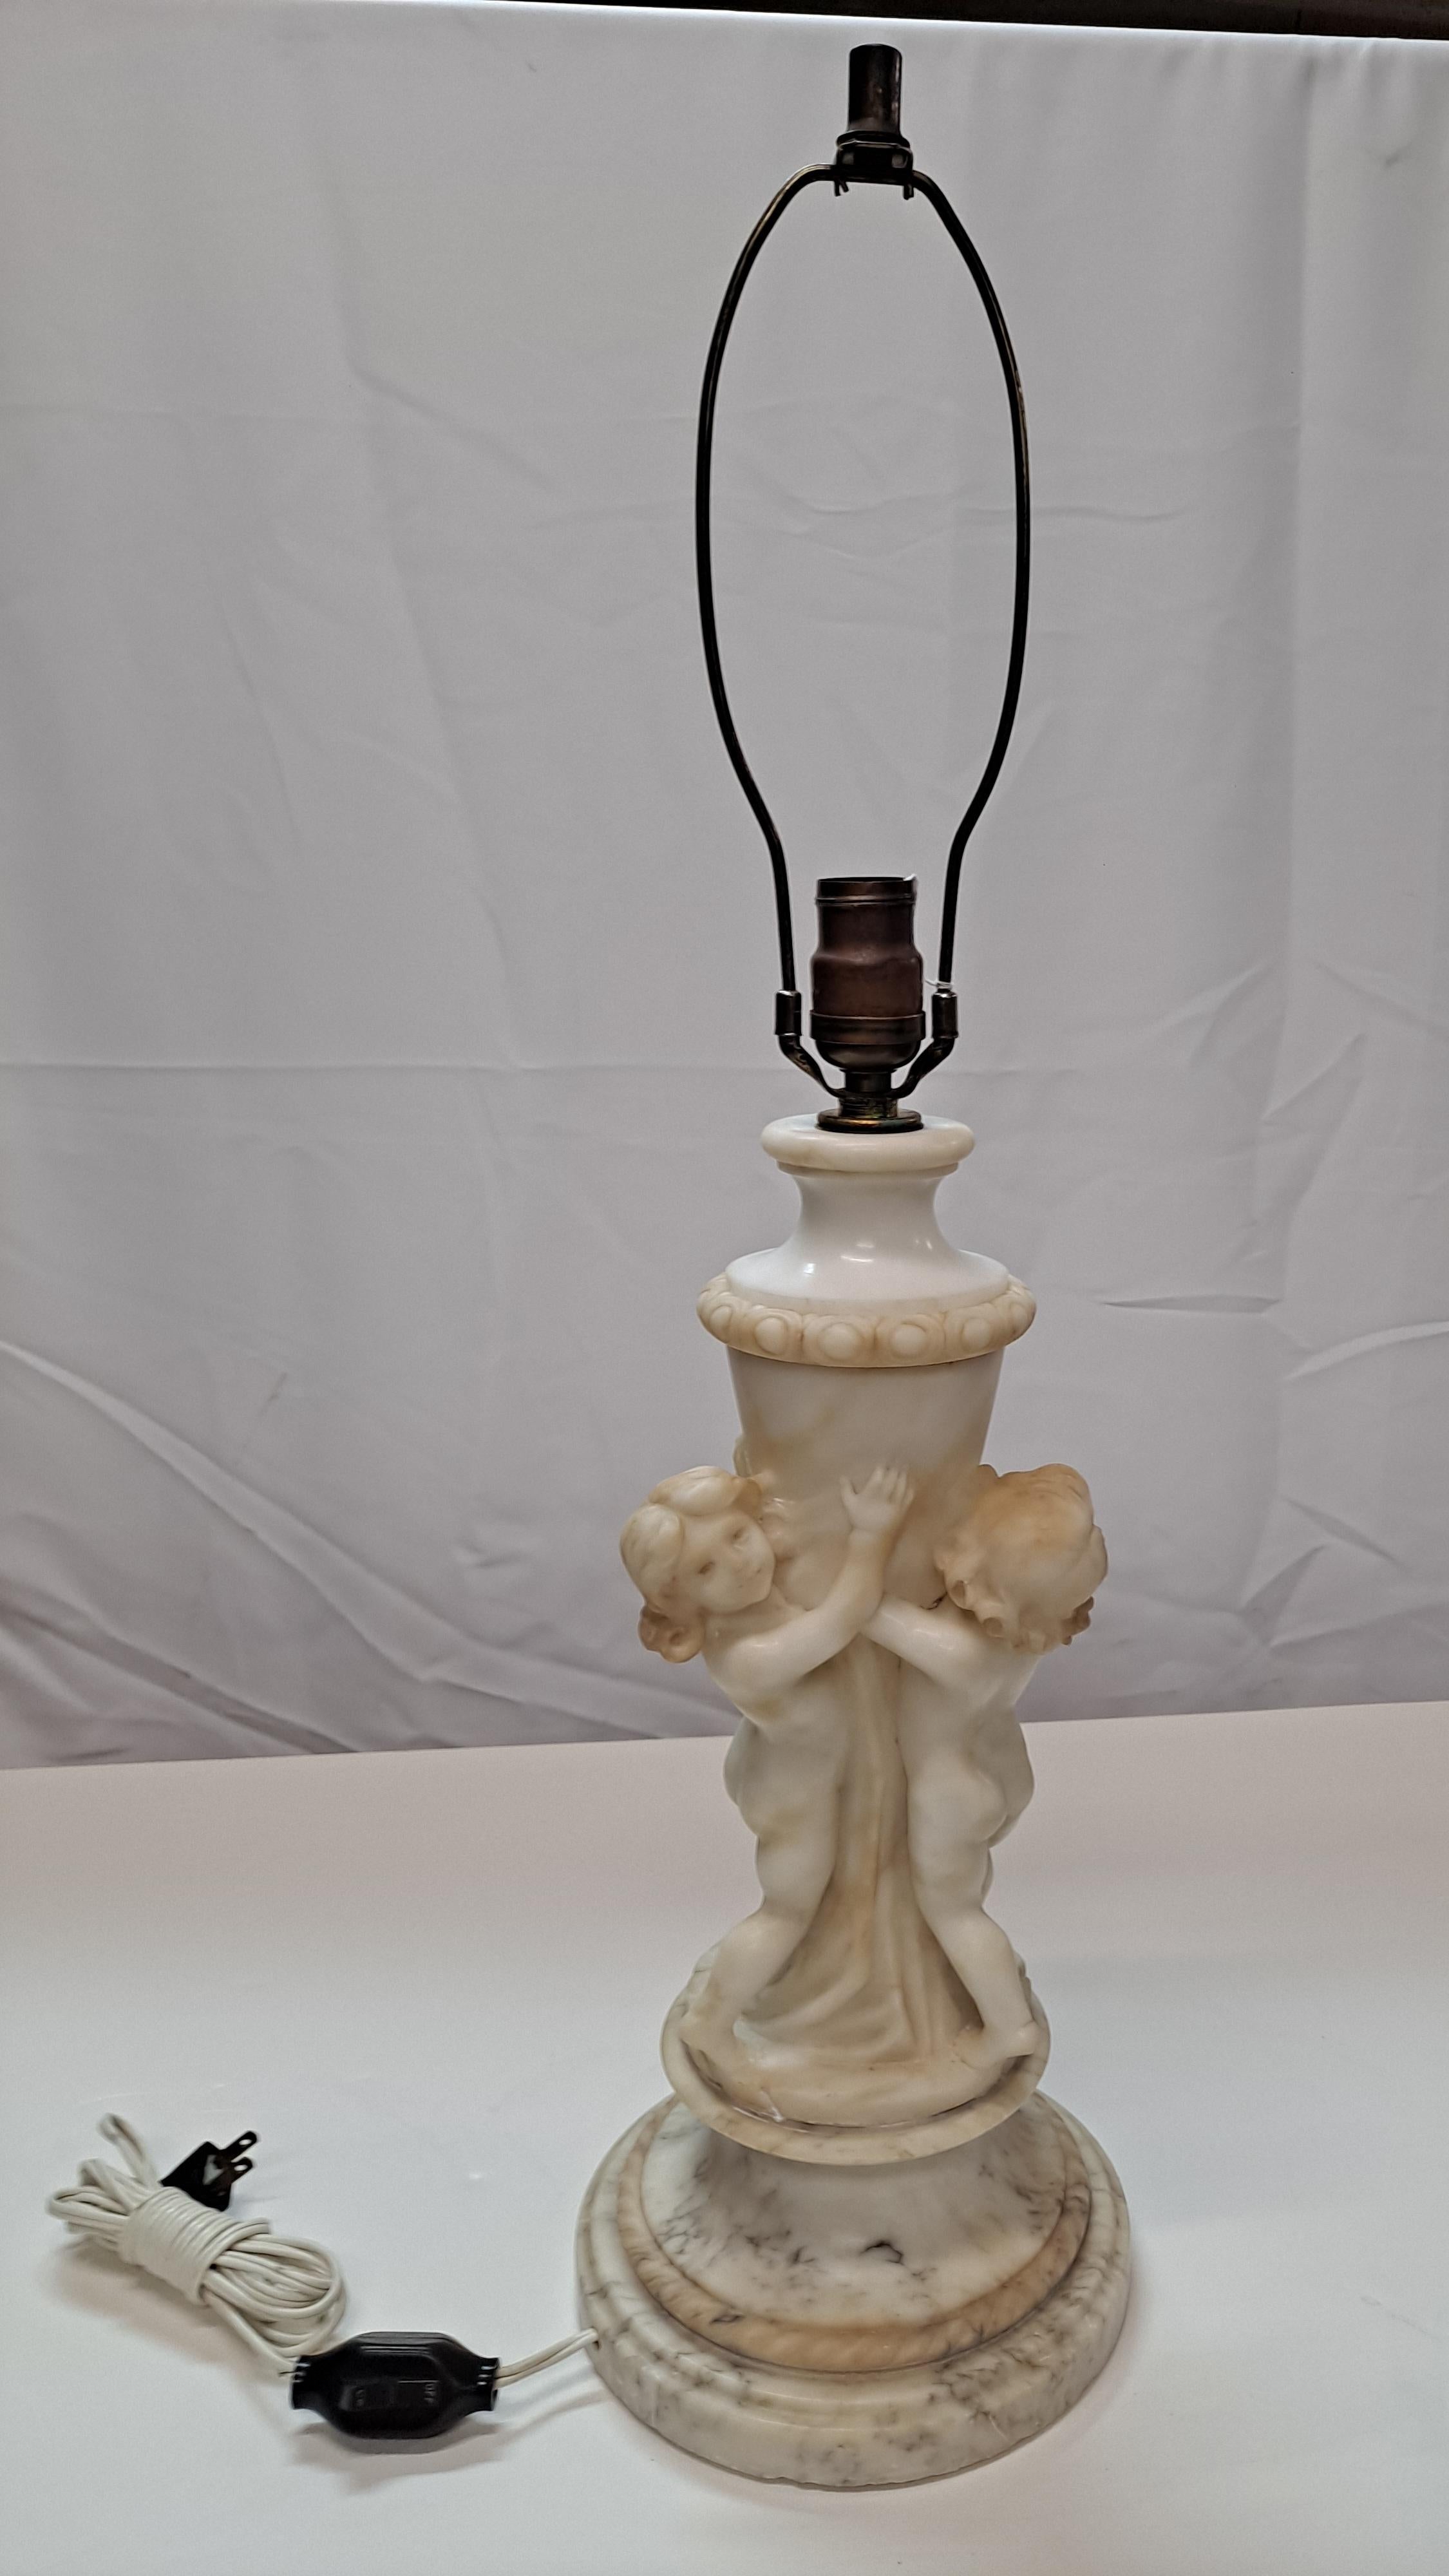 19th century Italian Carved Alabaster Sculpture Lamp with Marble Base 

8